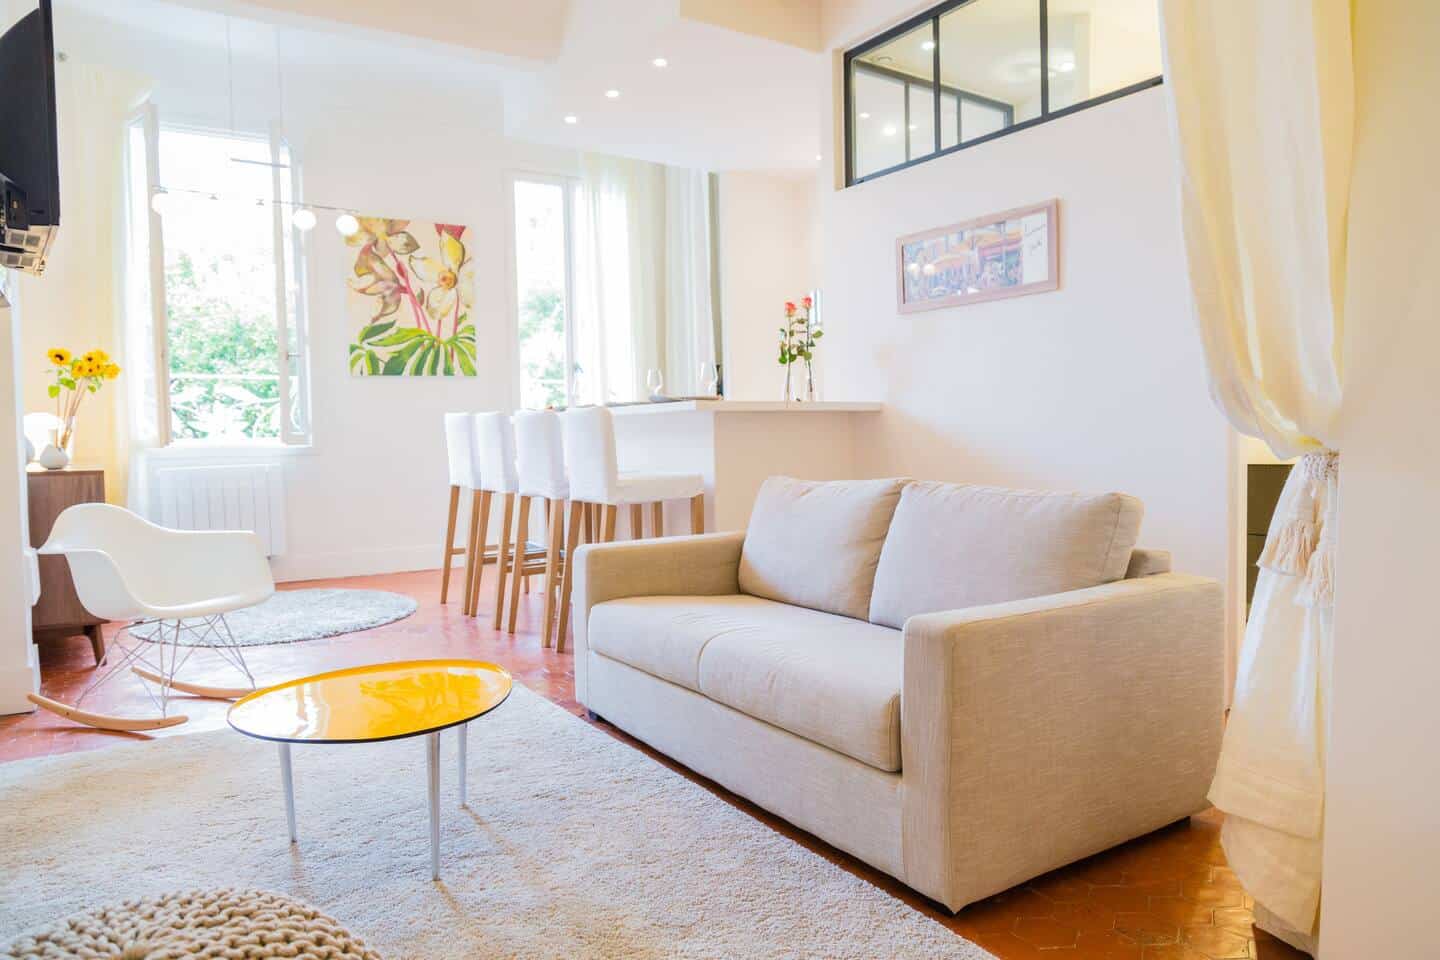 Image of Airbnb rental in Aix-en-Provence, France